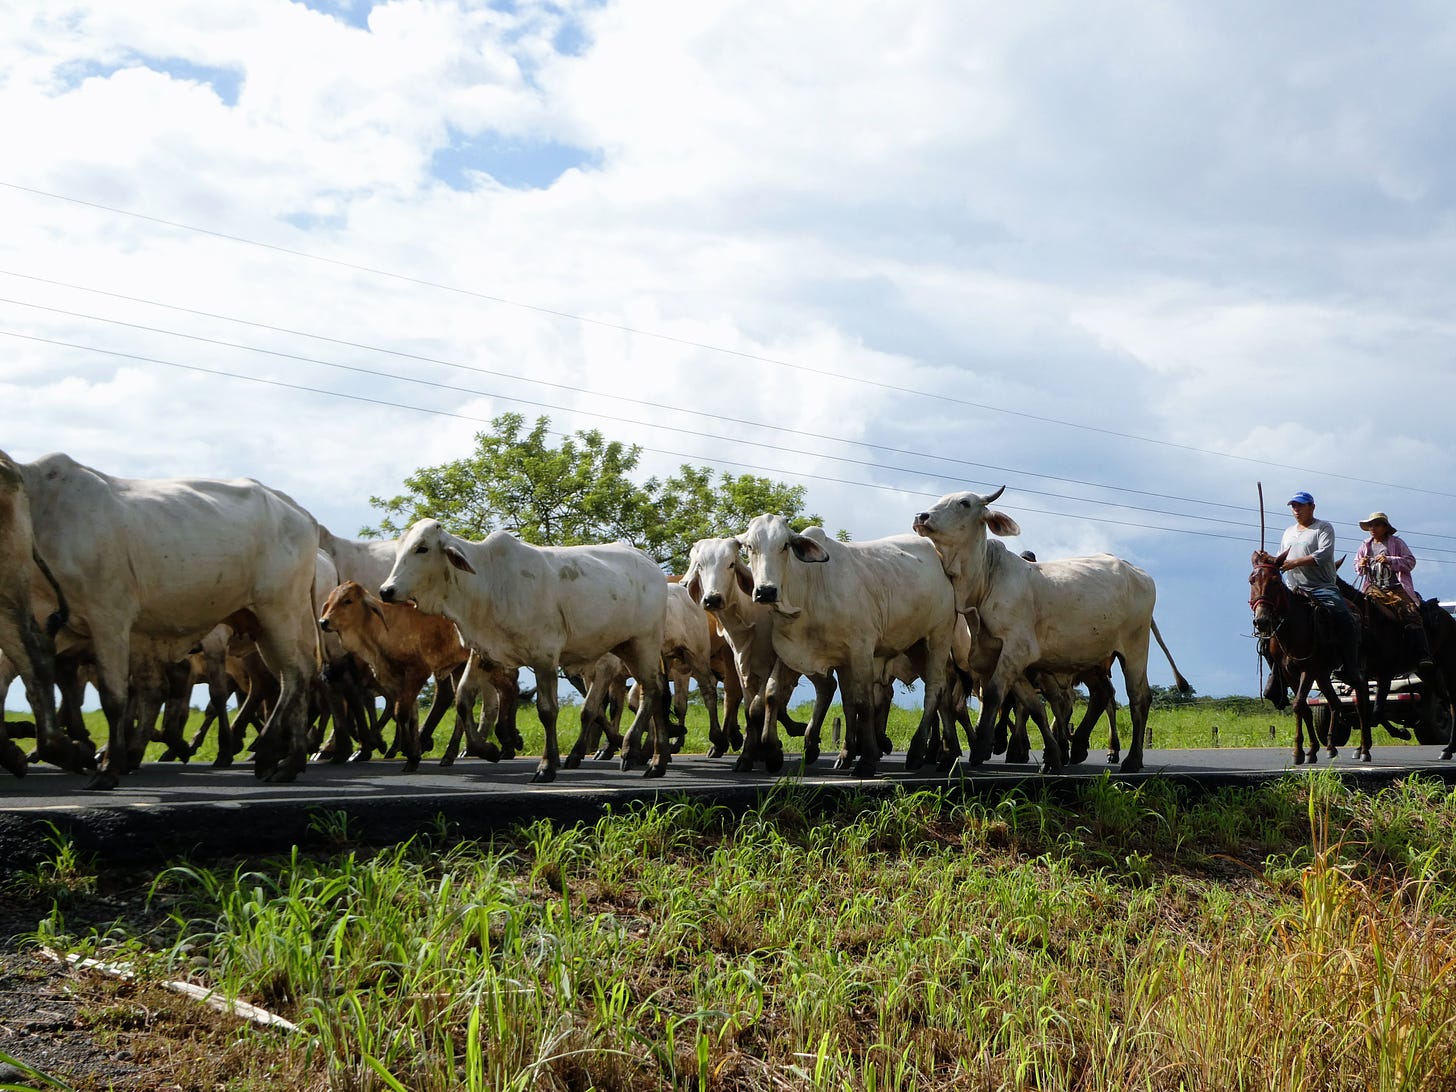 Group of white cows on the road, with two cowboys on horses behind them